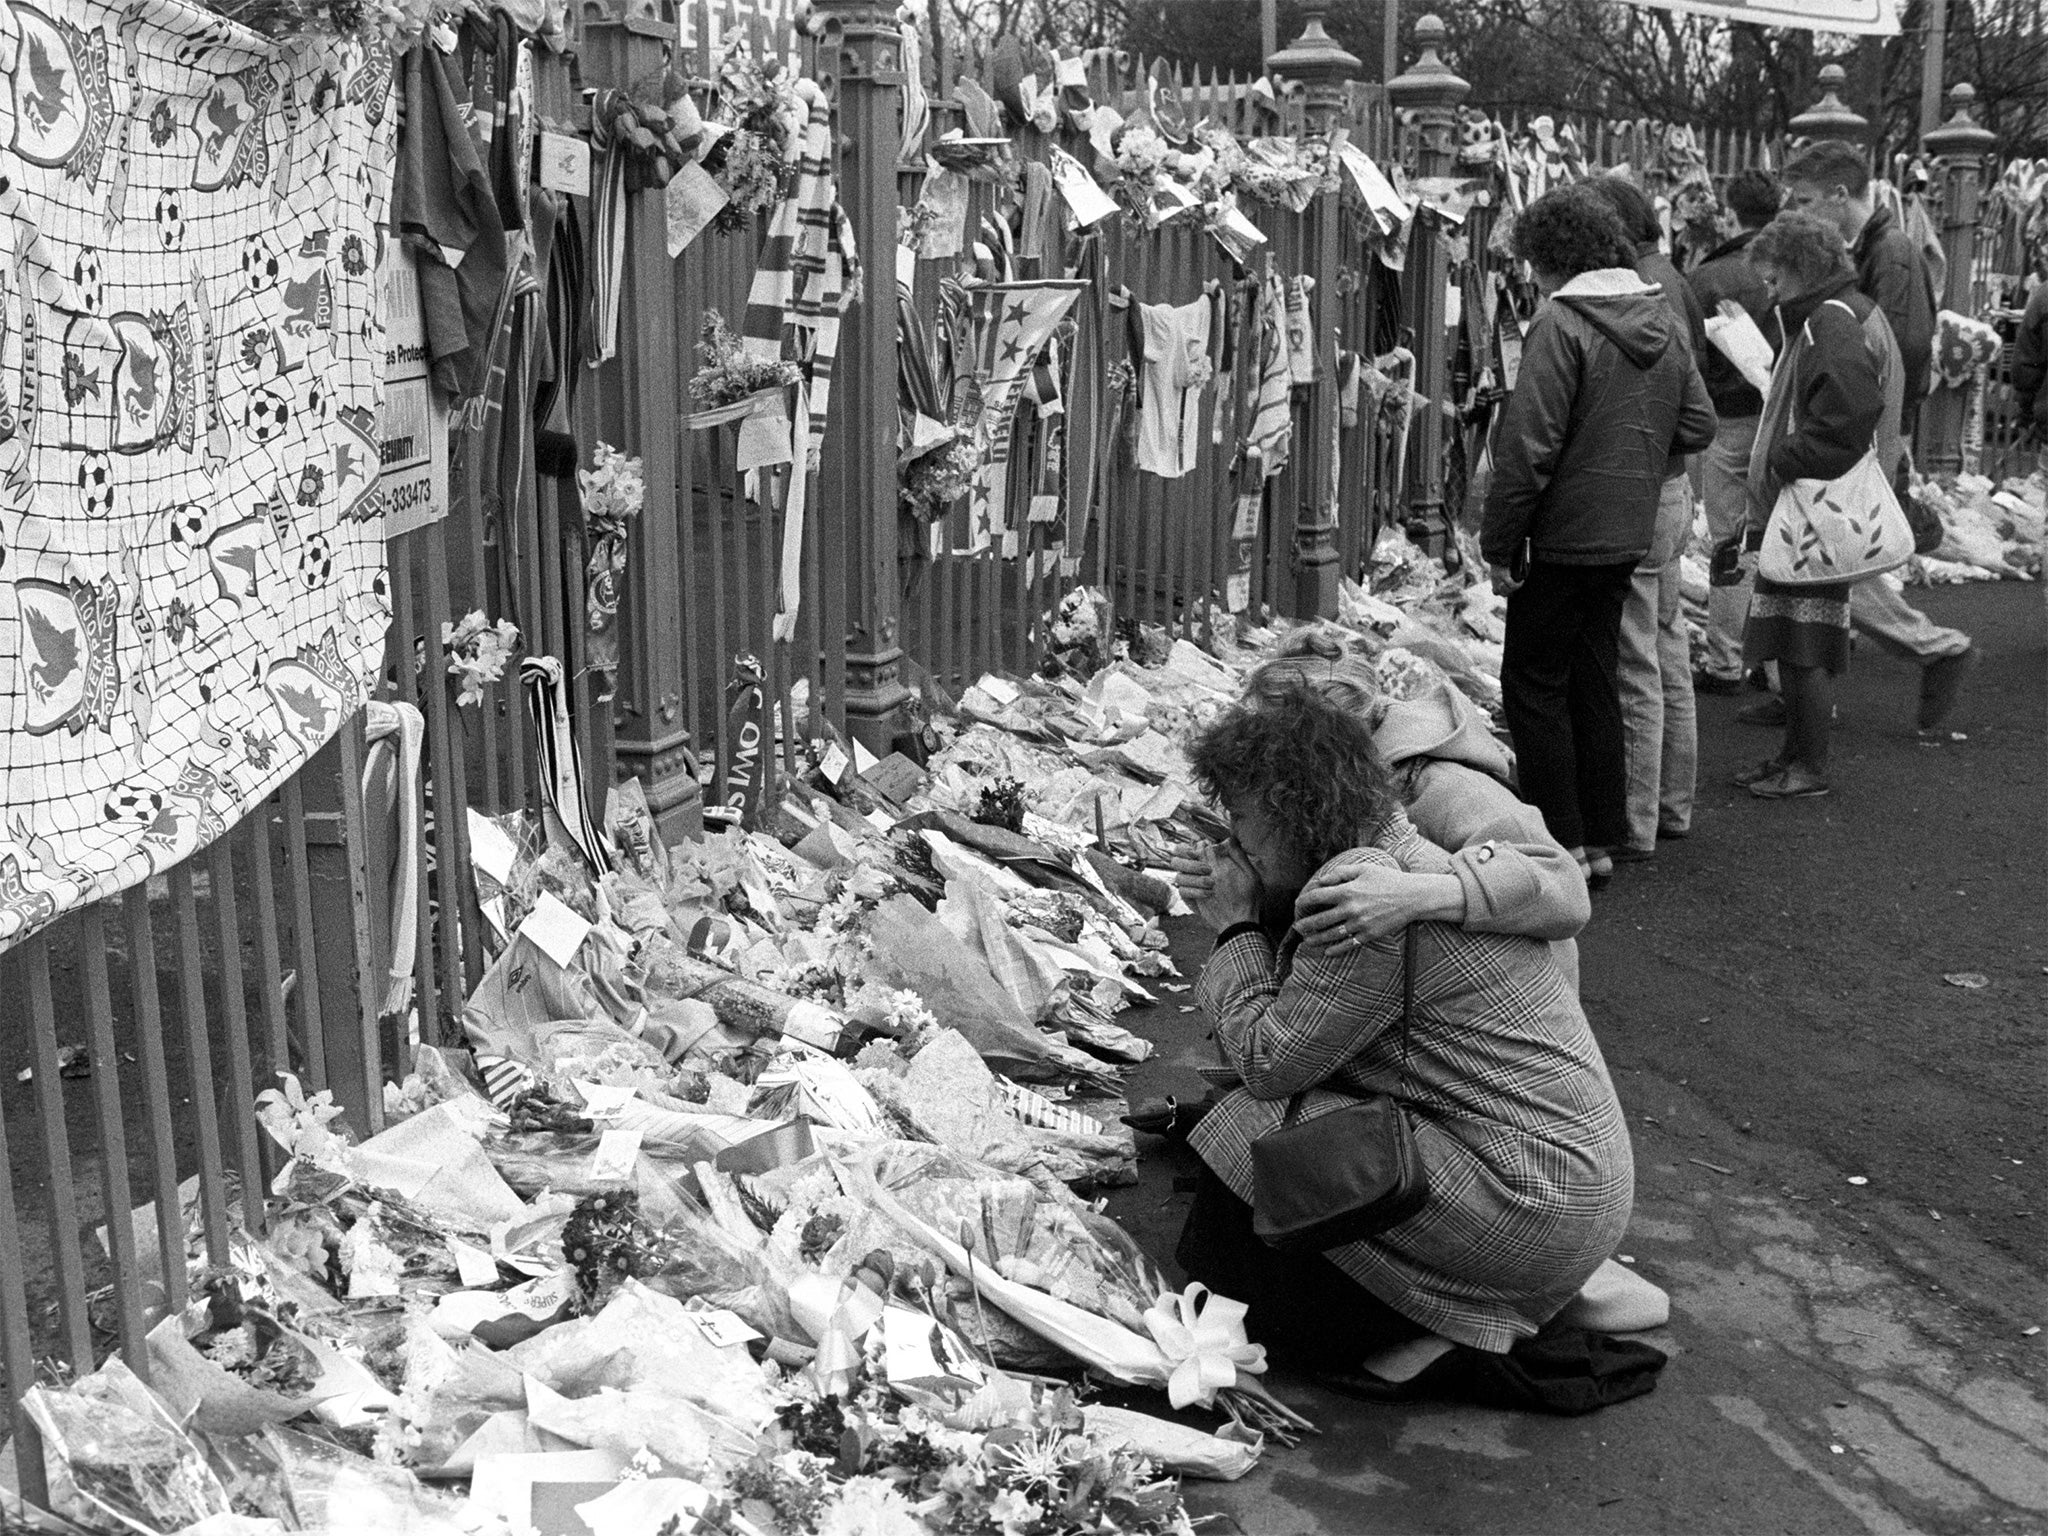 Floral tributes outside Hillsborough the morning after the disaster